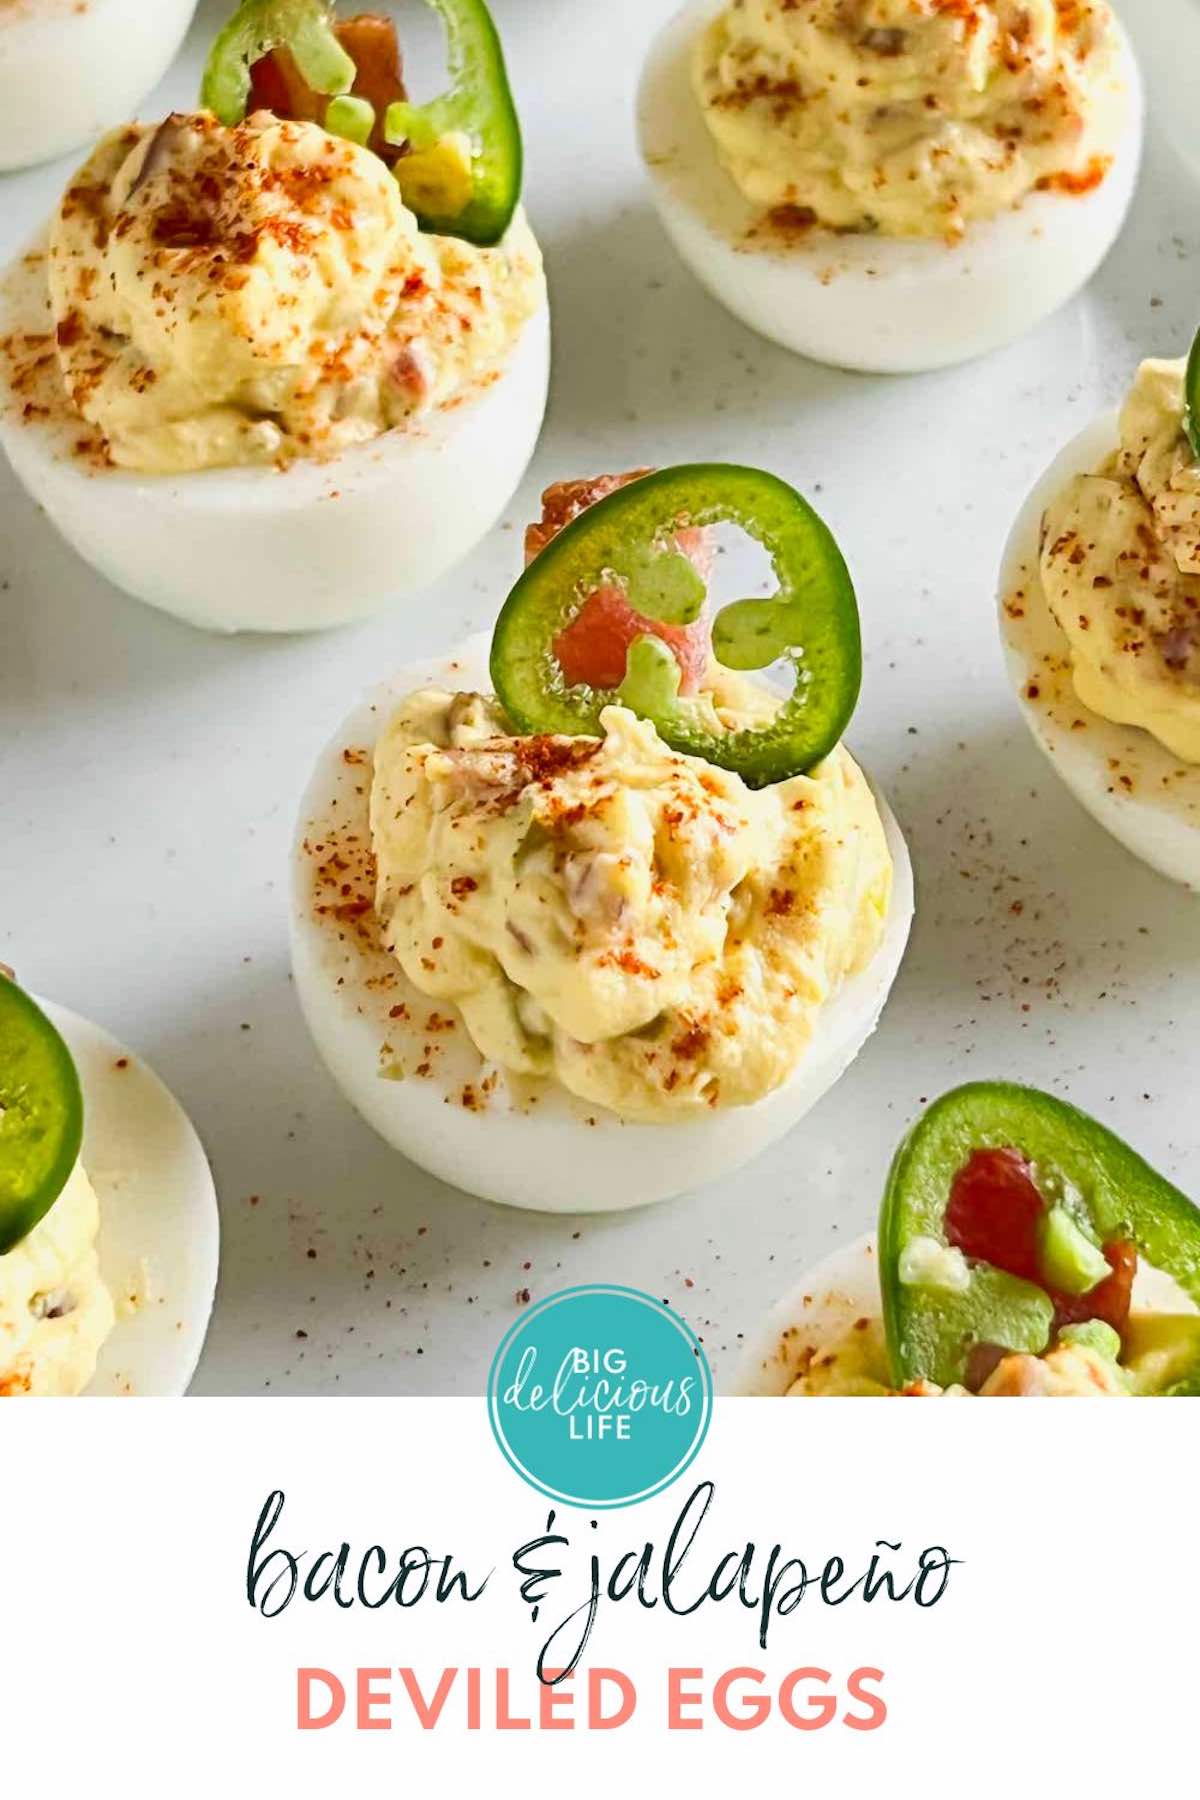 Branded Pinterest template with photo of close up of deviled egg.